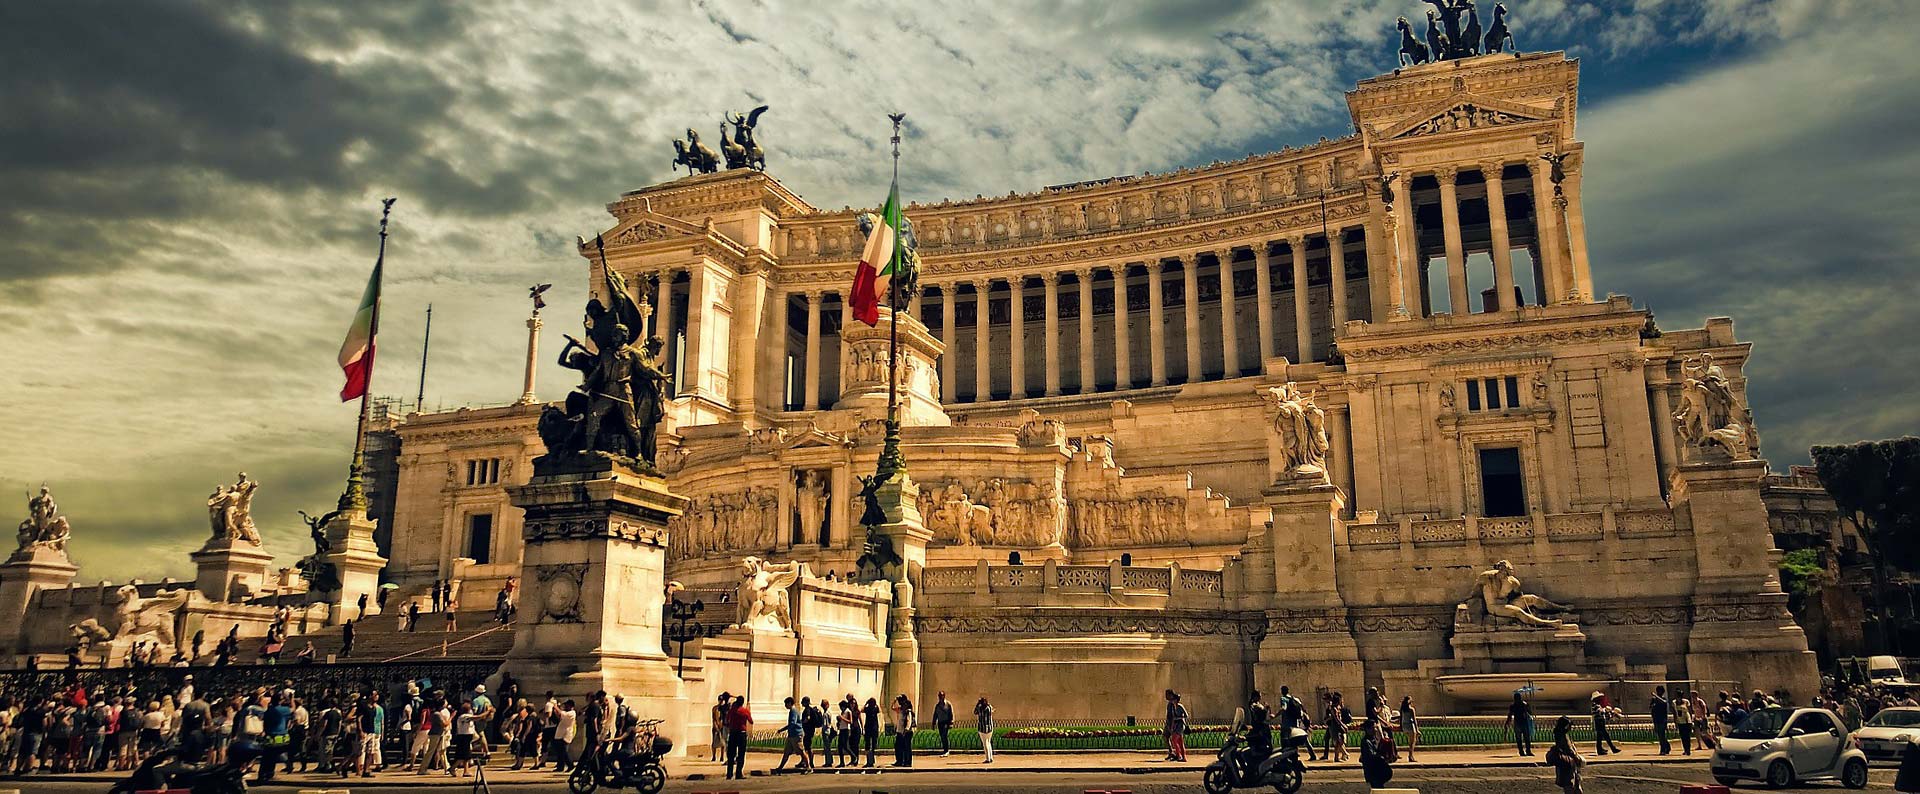 Discounted flight tickets from Sydney to Rome - IFlyFirstClass